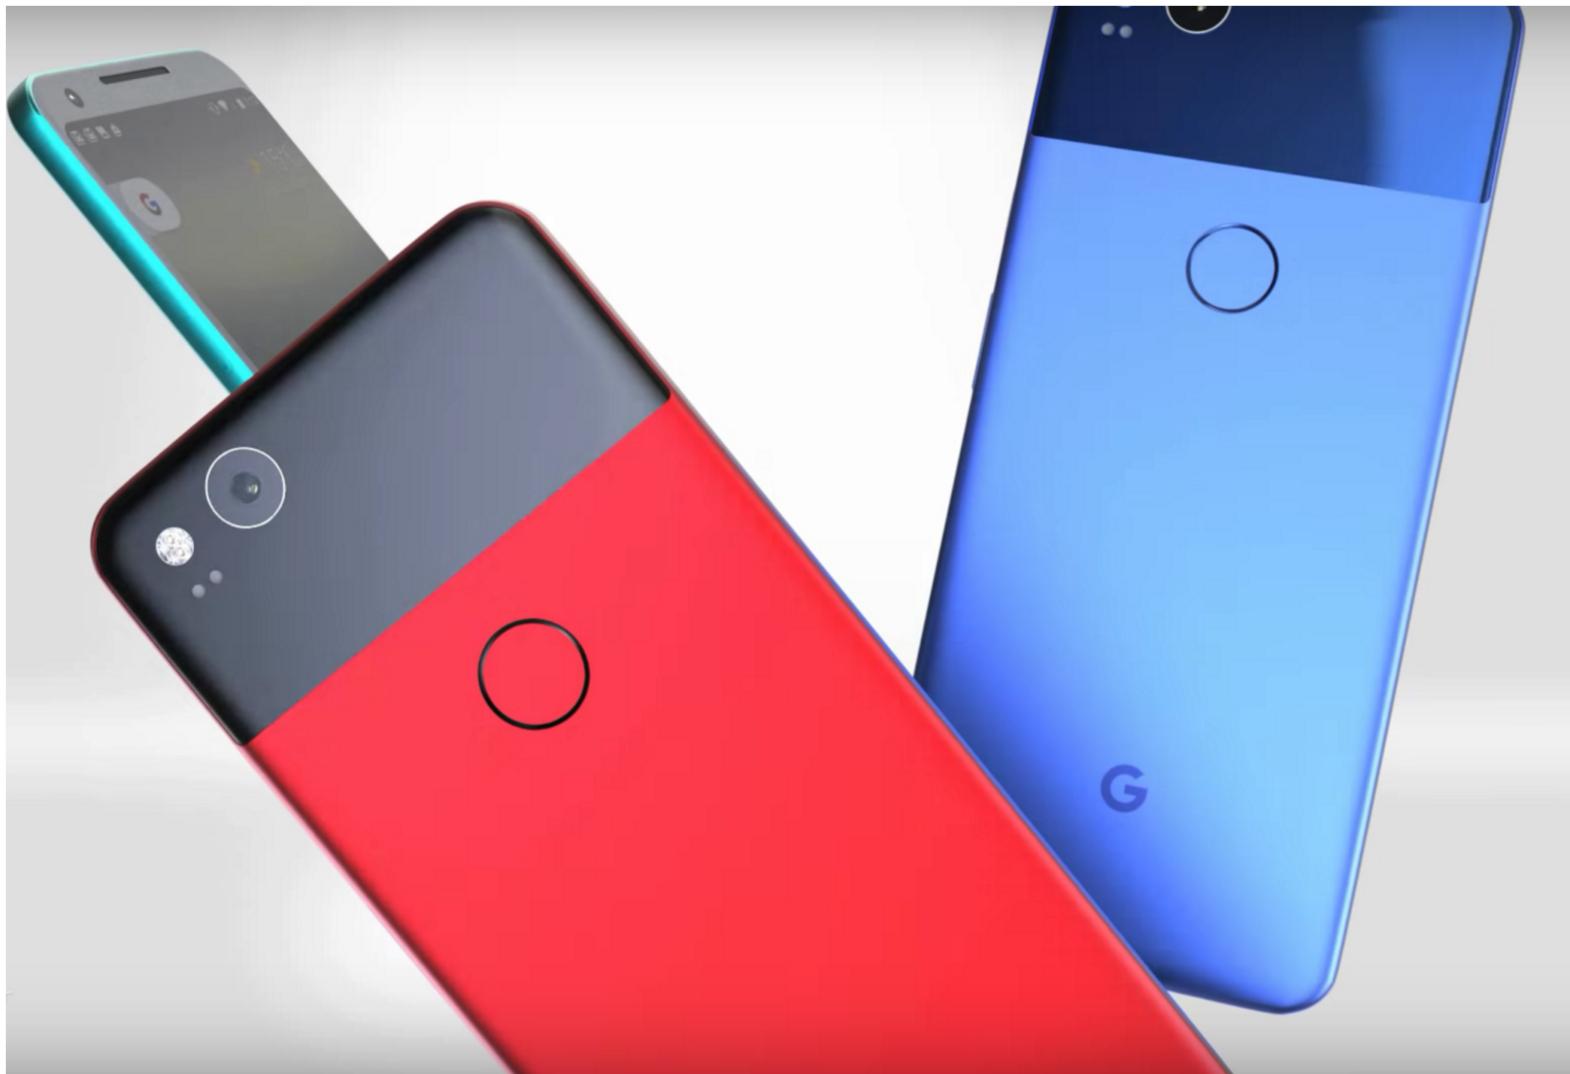 Google launches Pixel 2 and Pixel 2 XL with Android 8.0